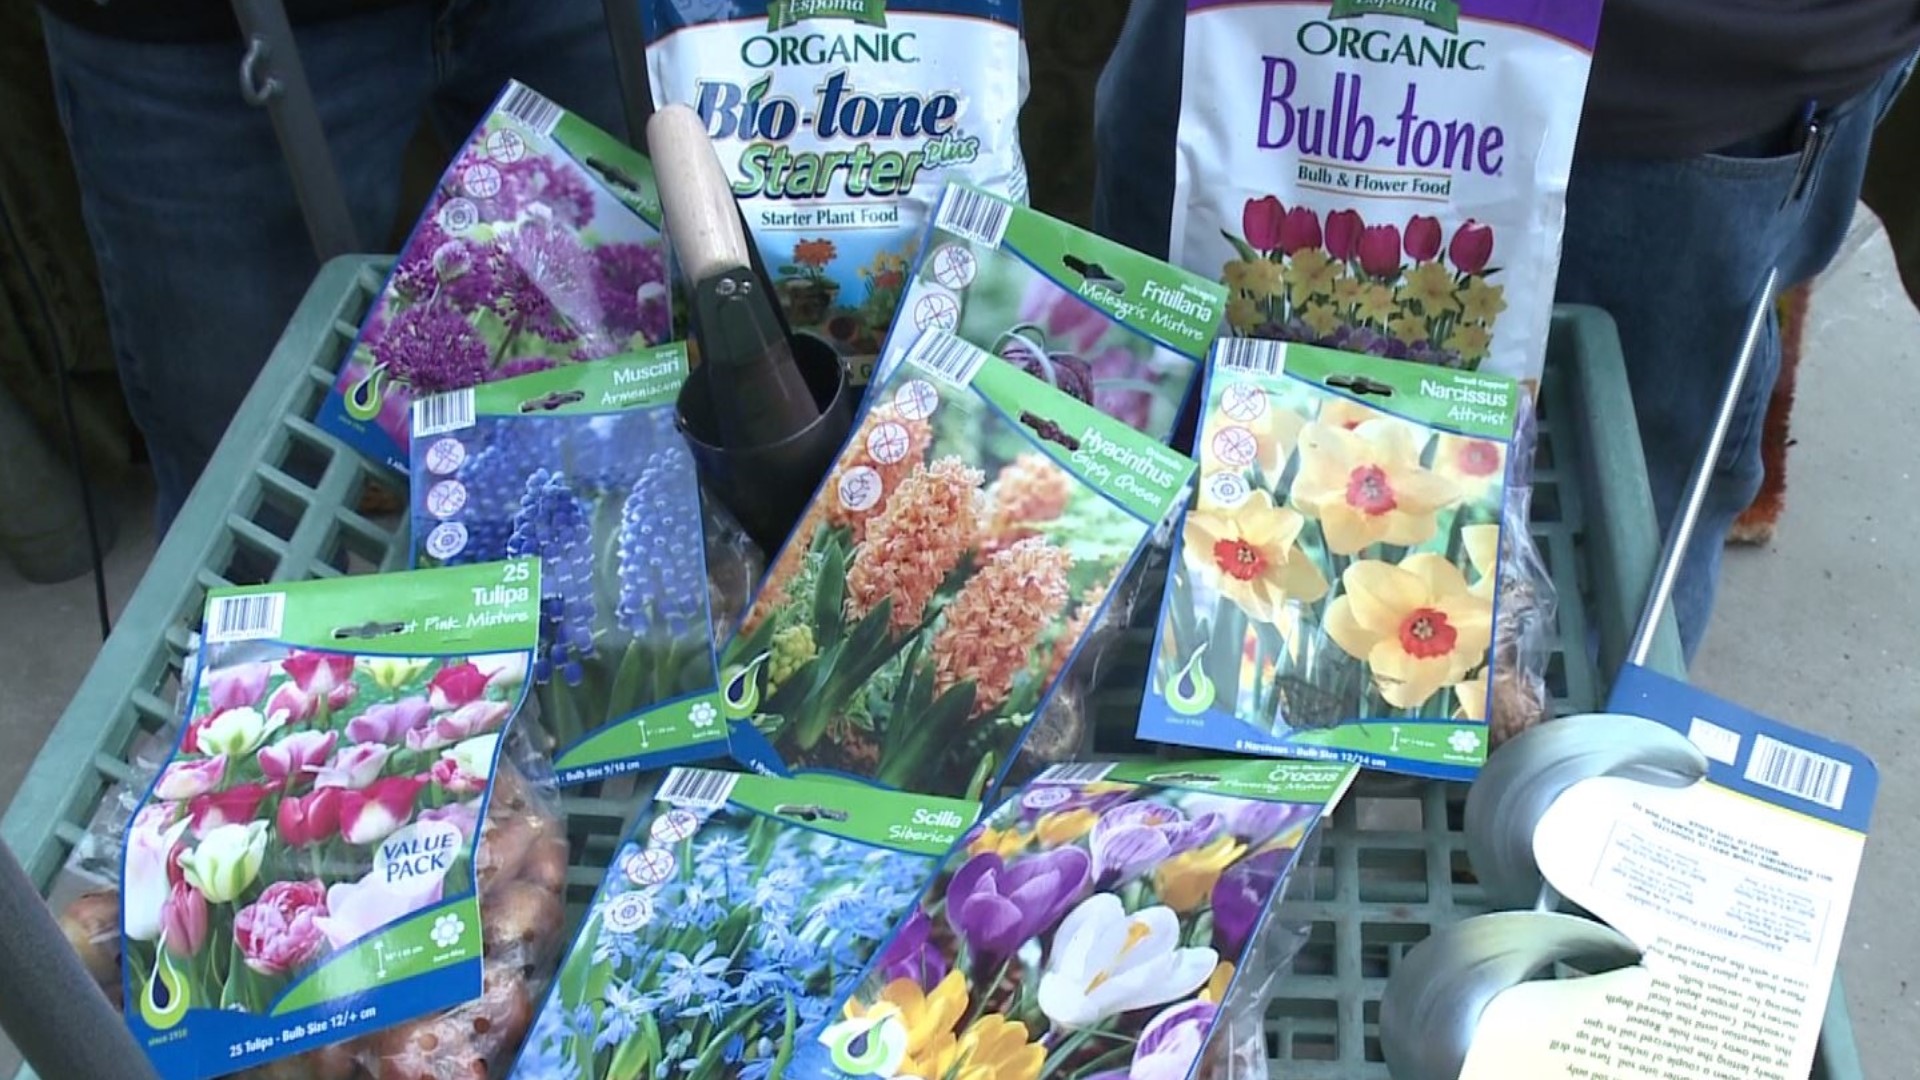 It's time to get bulbs in the ground! Gardening with Gutner talks to Tom Estabrook about how to have a successful planting for a beautiful spring.